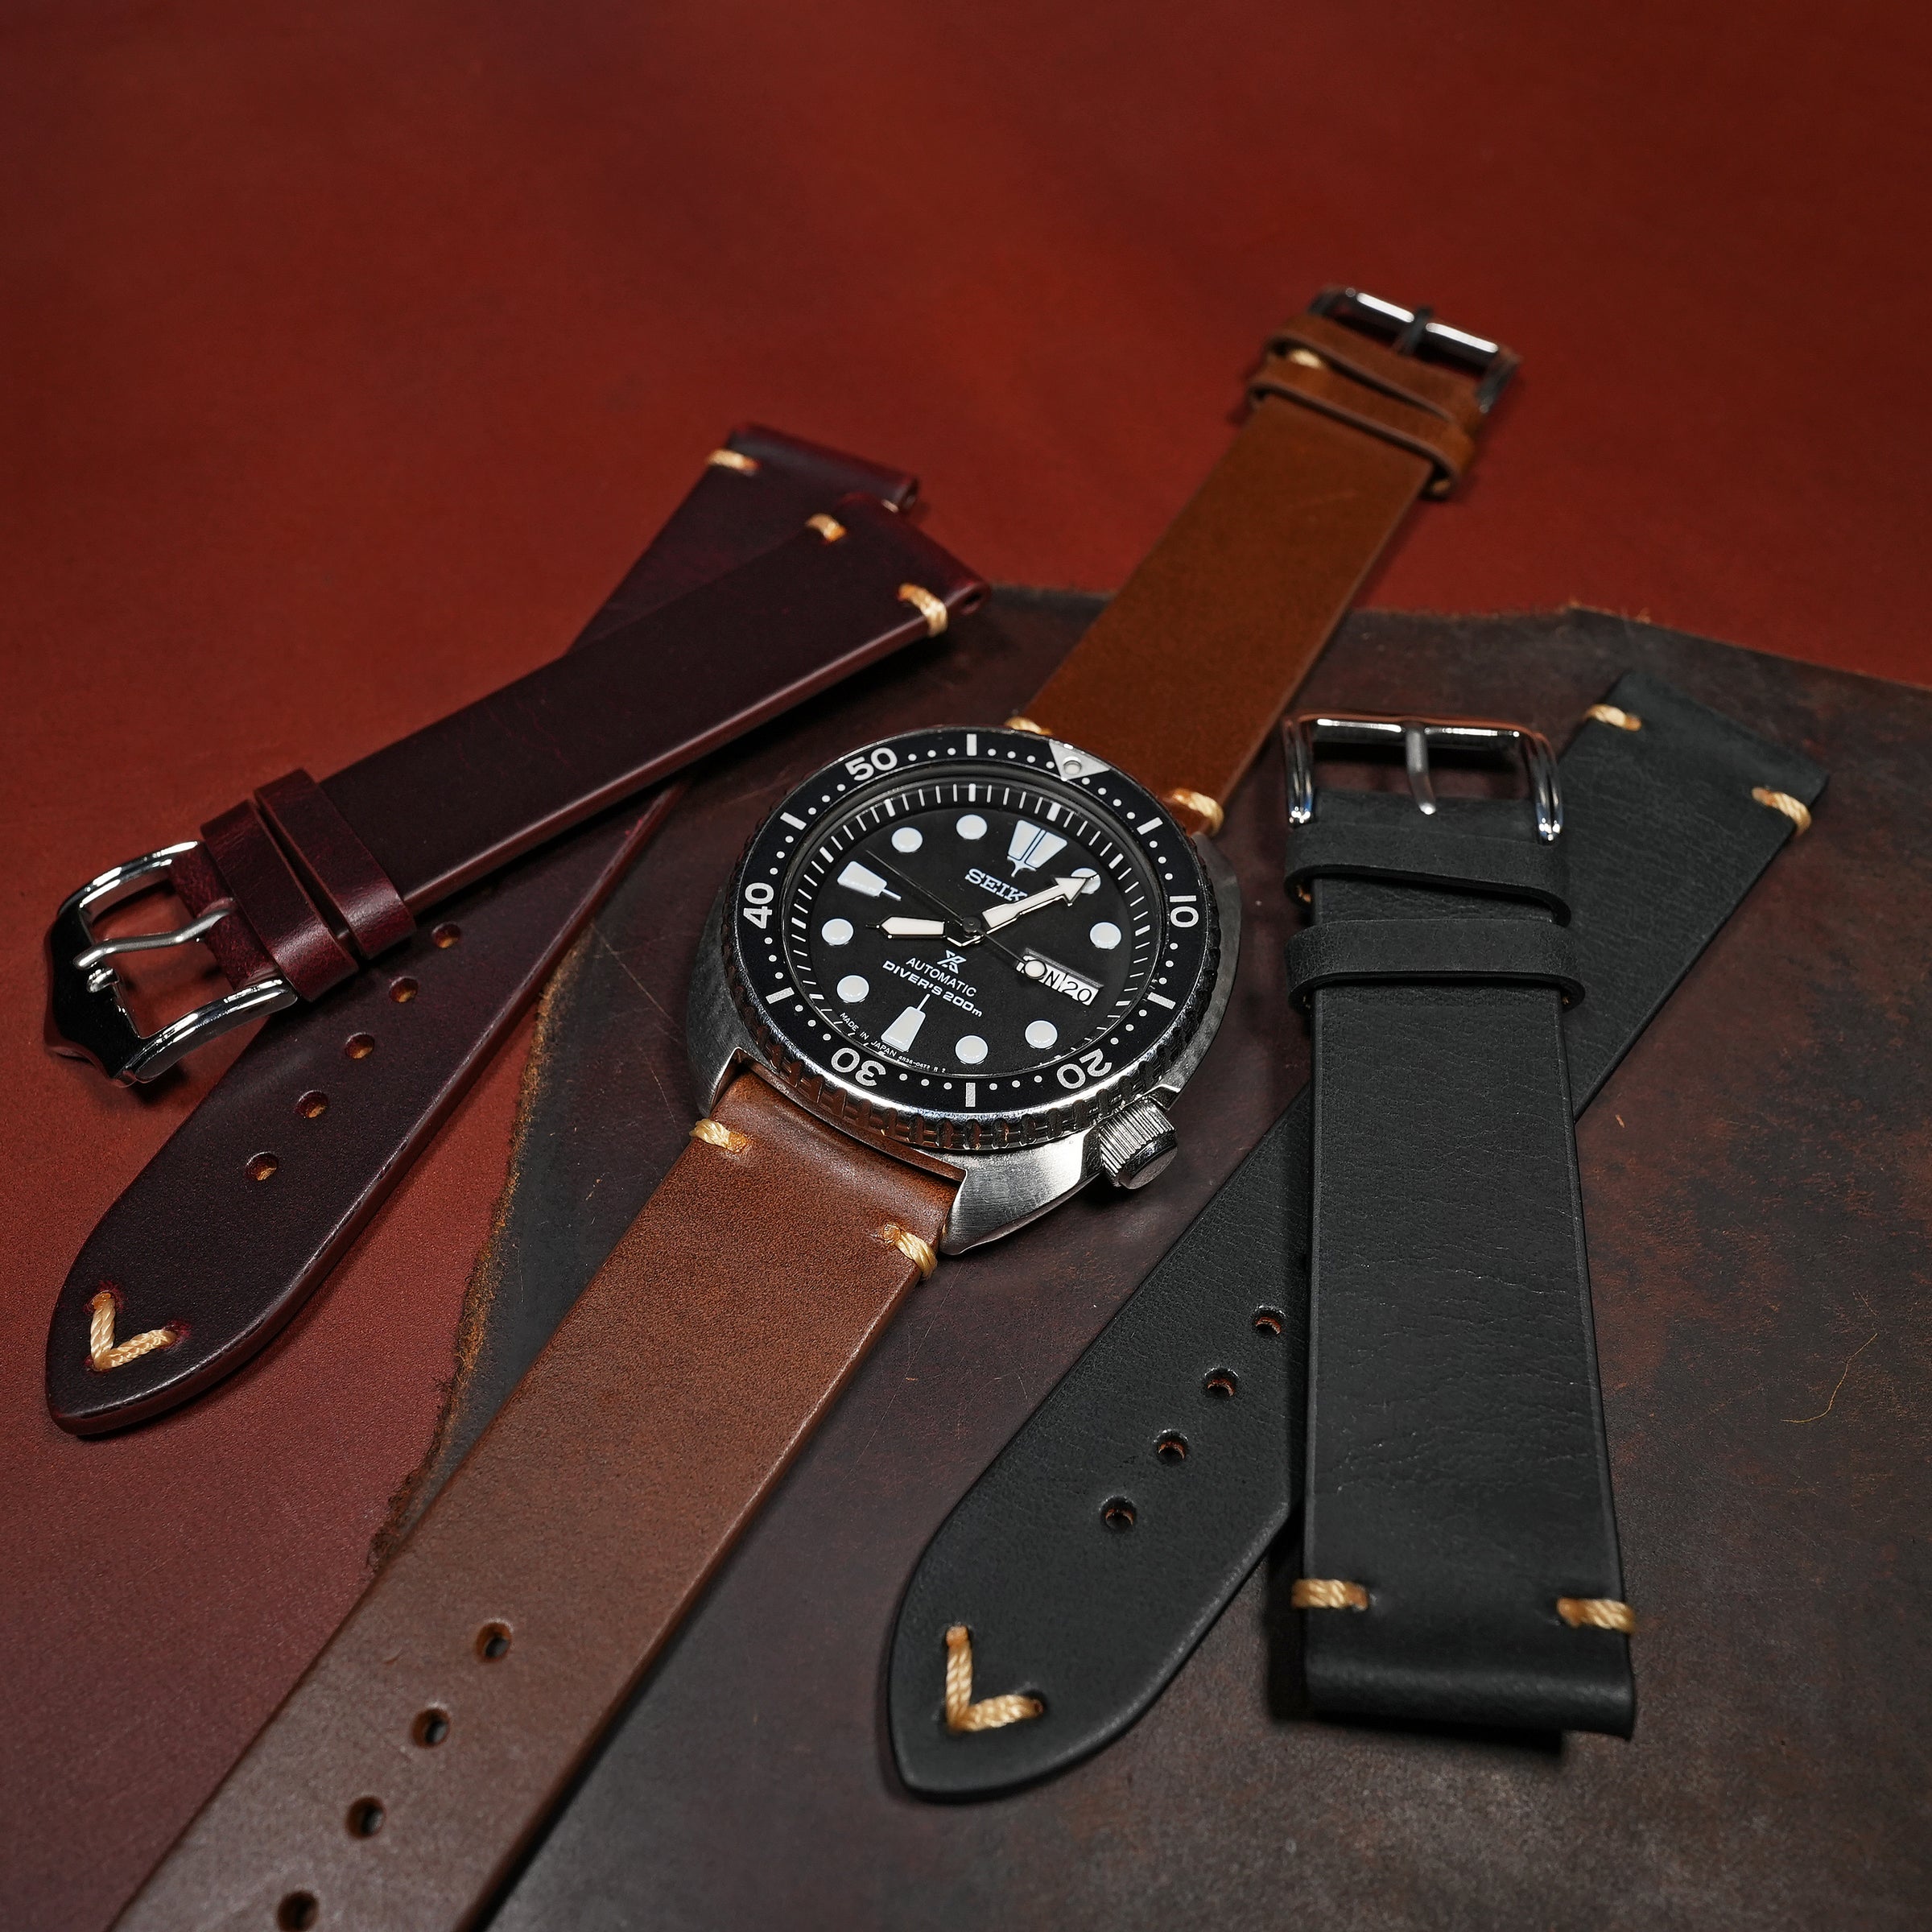 Premium Vintage Oil Waxed Leather Watch Strap in Tan - Nomad Watch Works SG